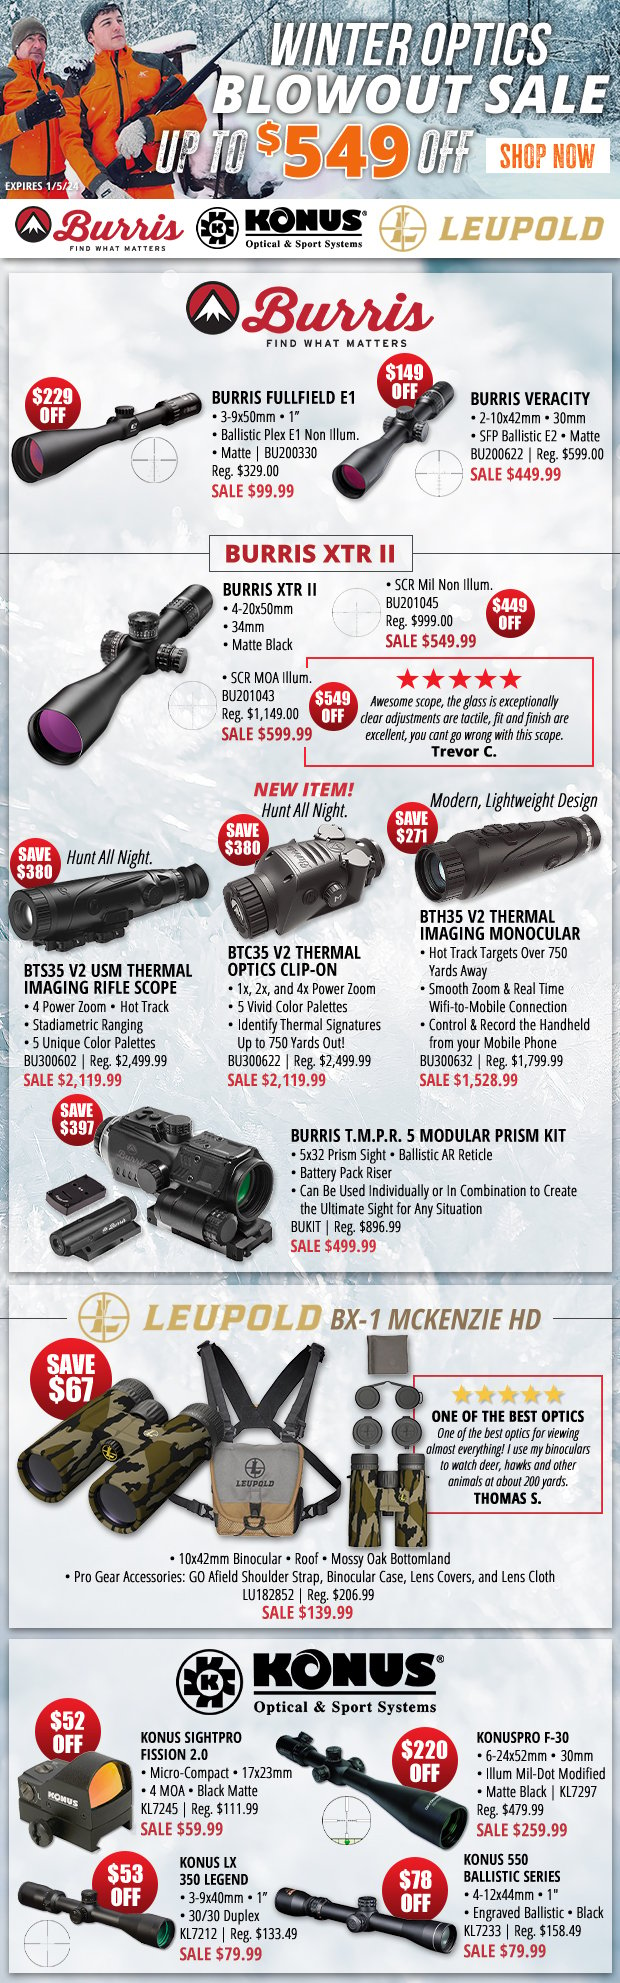 Up to $549 Off with Our Winter Optics Blowout Sale!